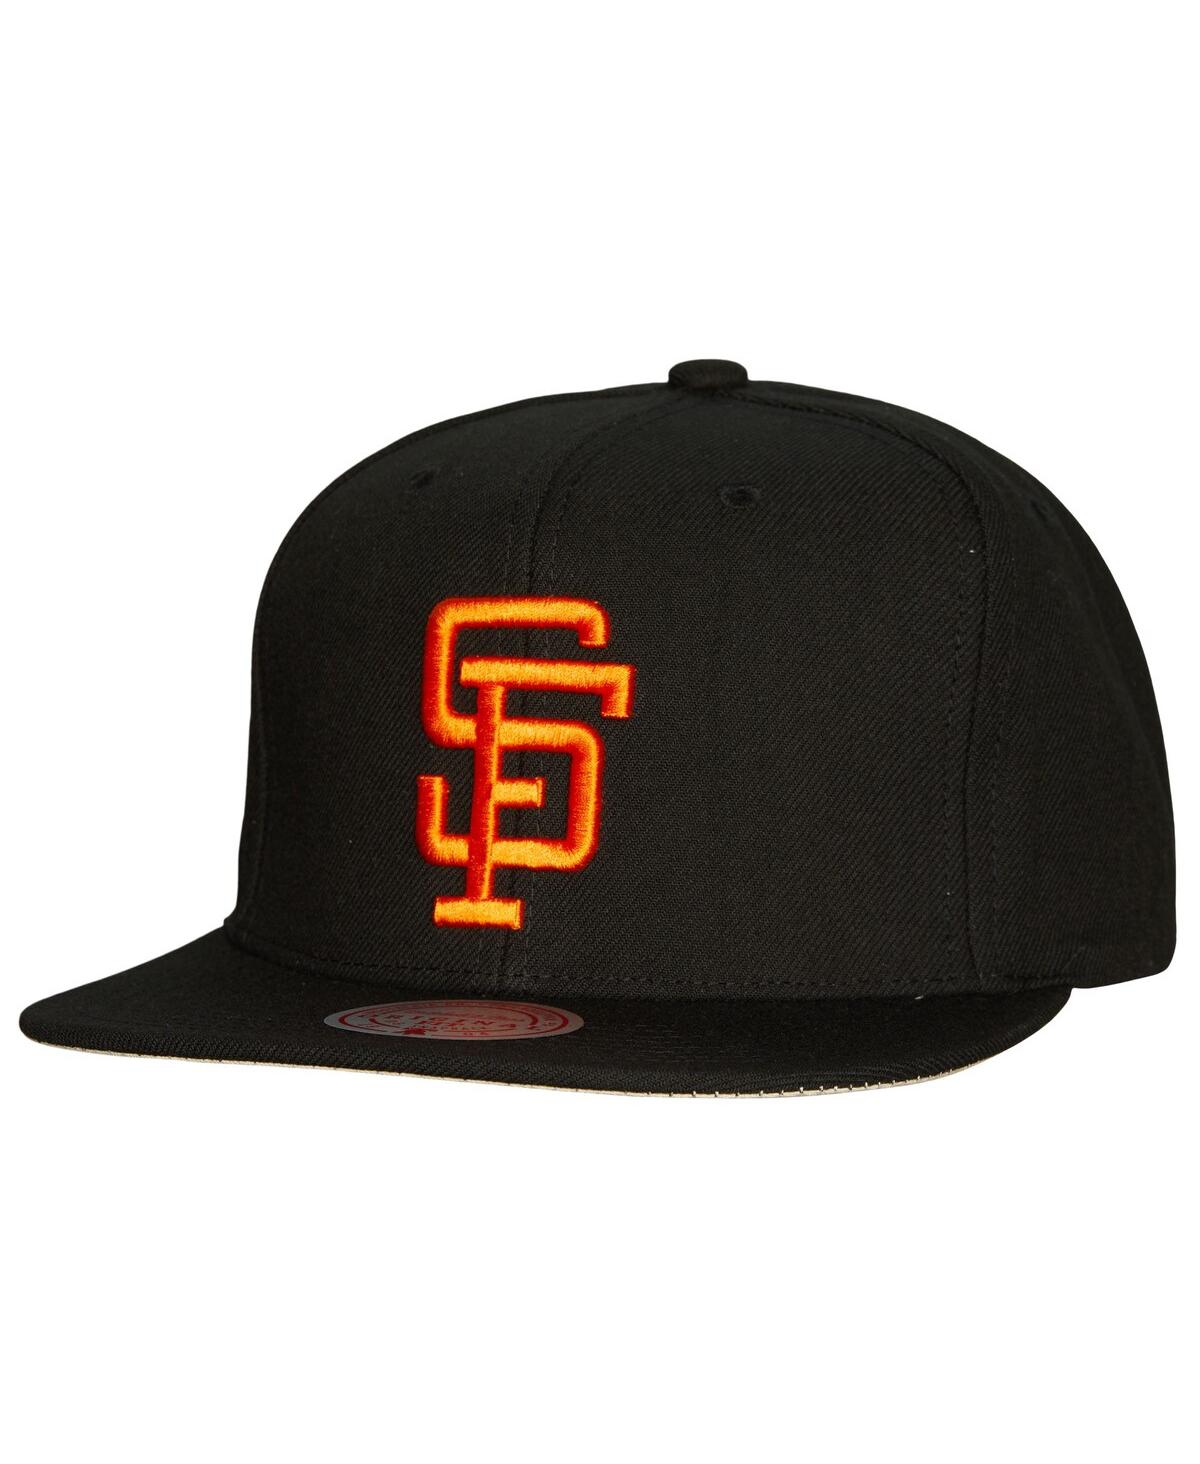 Mitchell & Ness Men's  Black San Francisco Giants Cooperstown Collection True Classics Snapback Hat